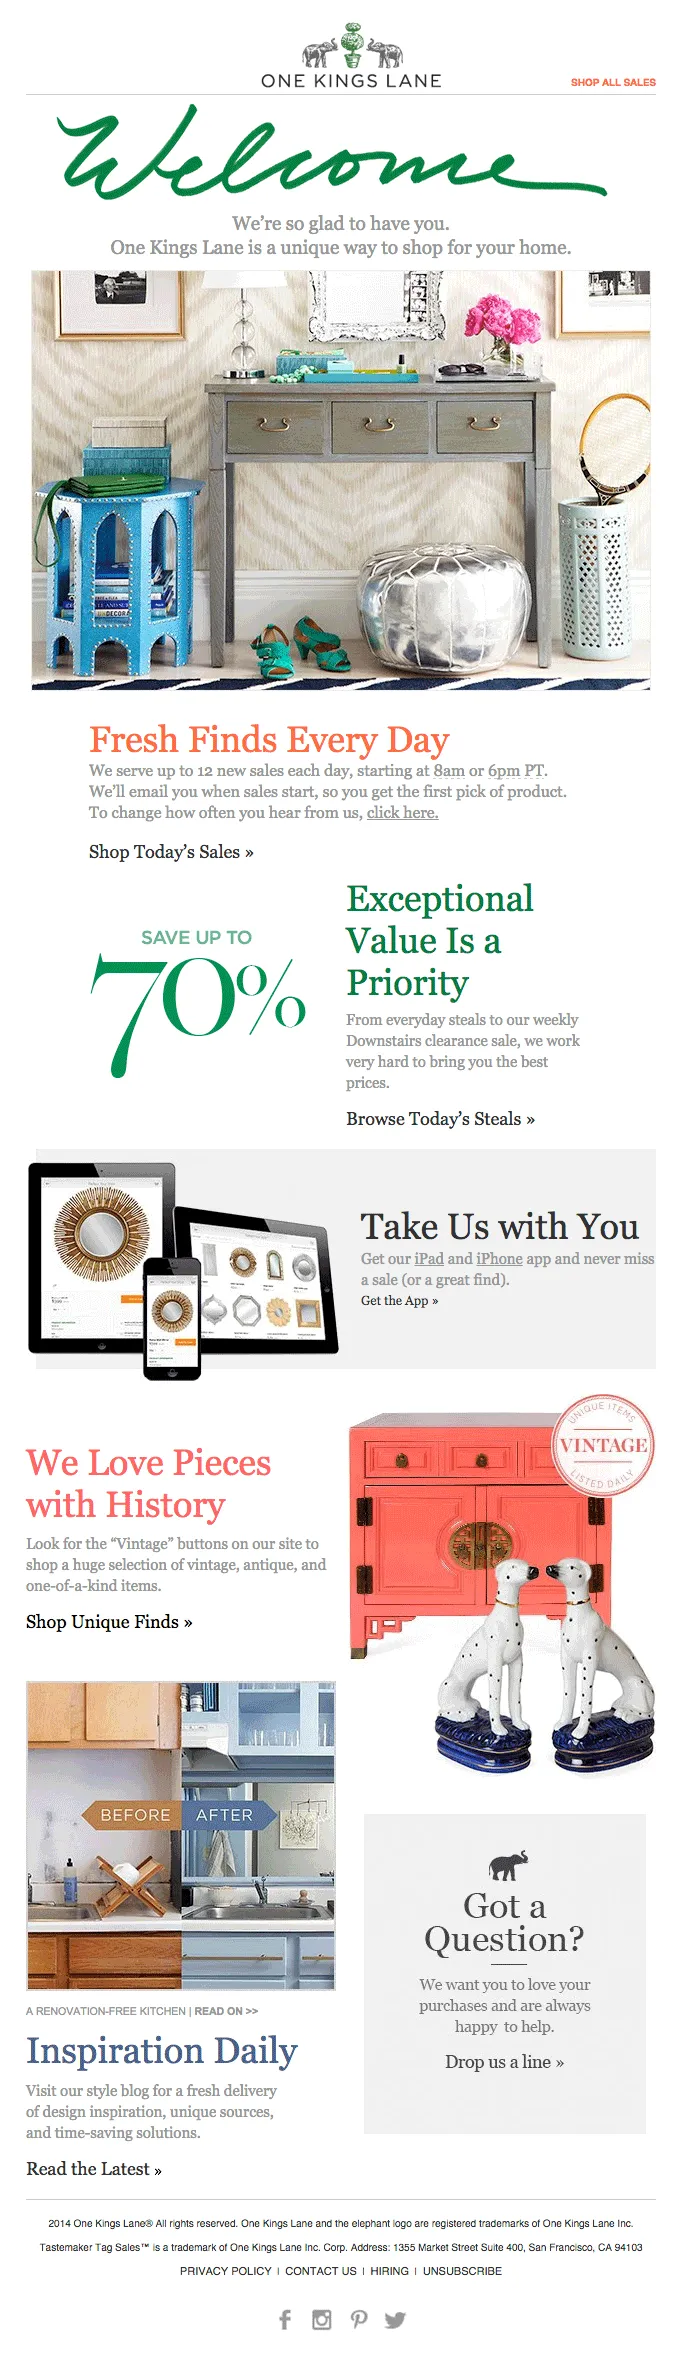 one-kings-lane-fashion-ecommerce-email-marketing-examples-smaller